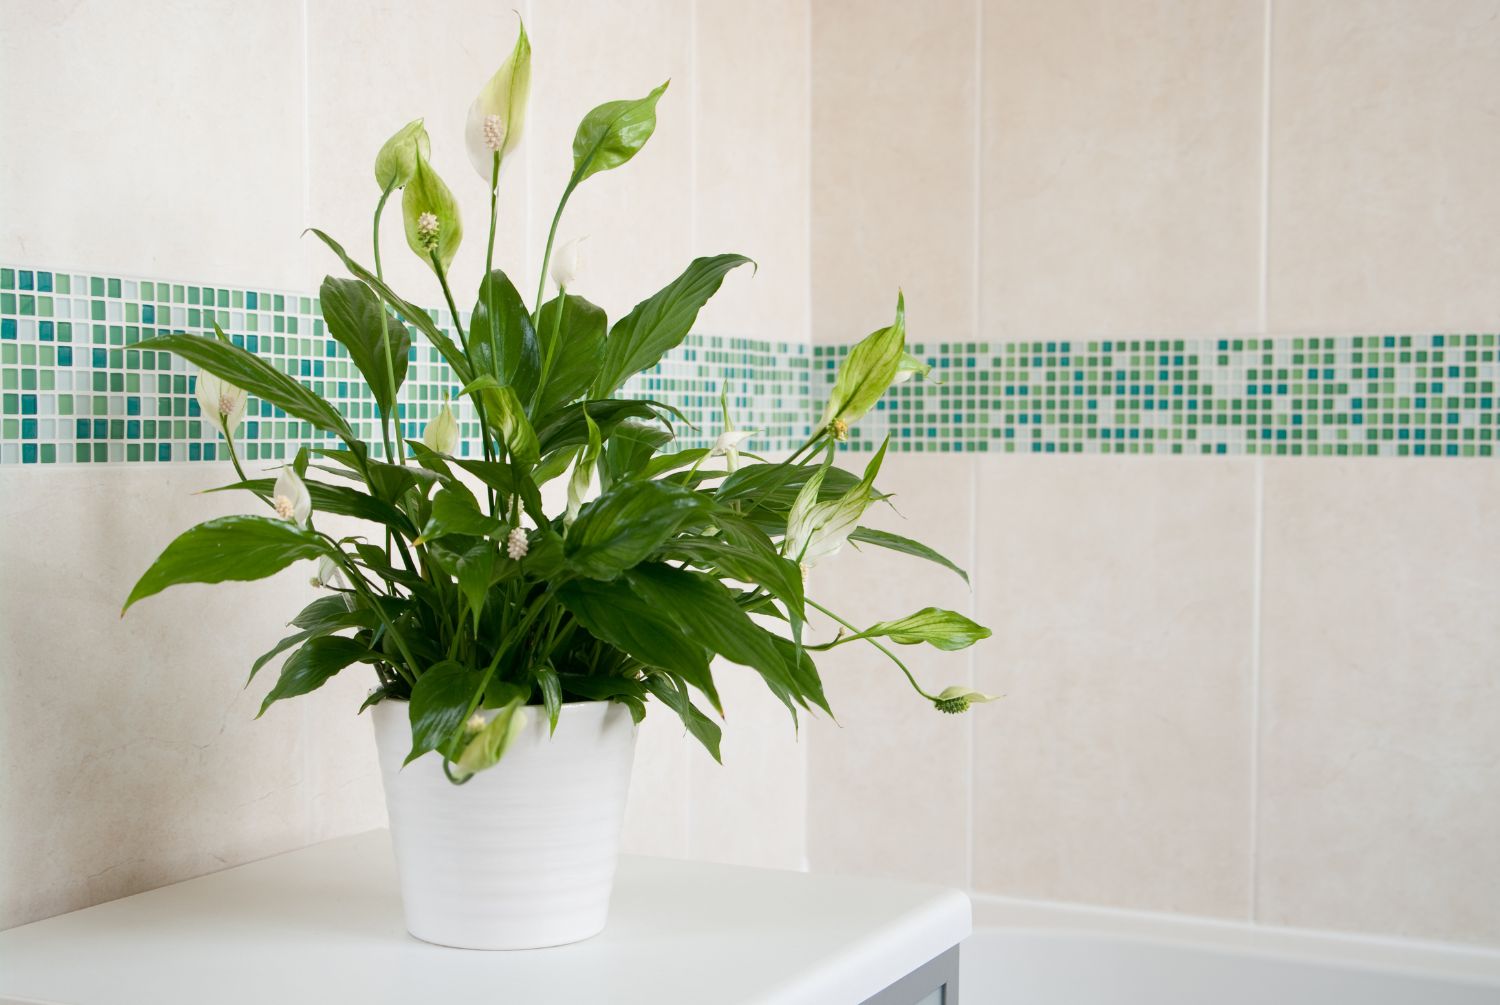 peace lily in bathroom on top of a worktop and vanity unit with beige tiles and mosaic smaller patterned tiles - spathiphyllum